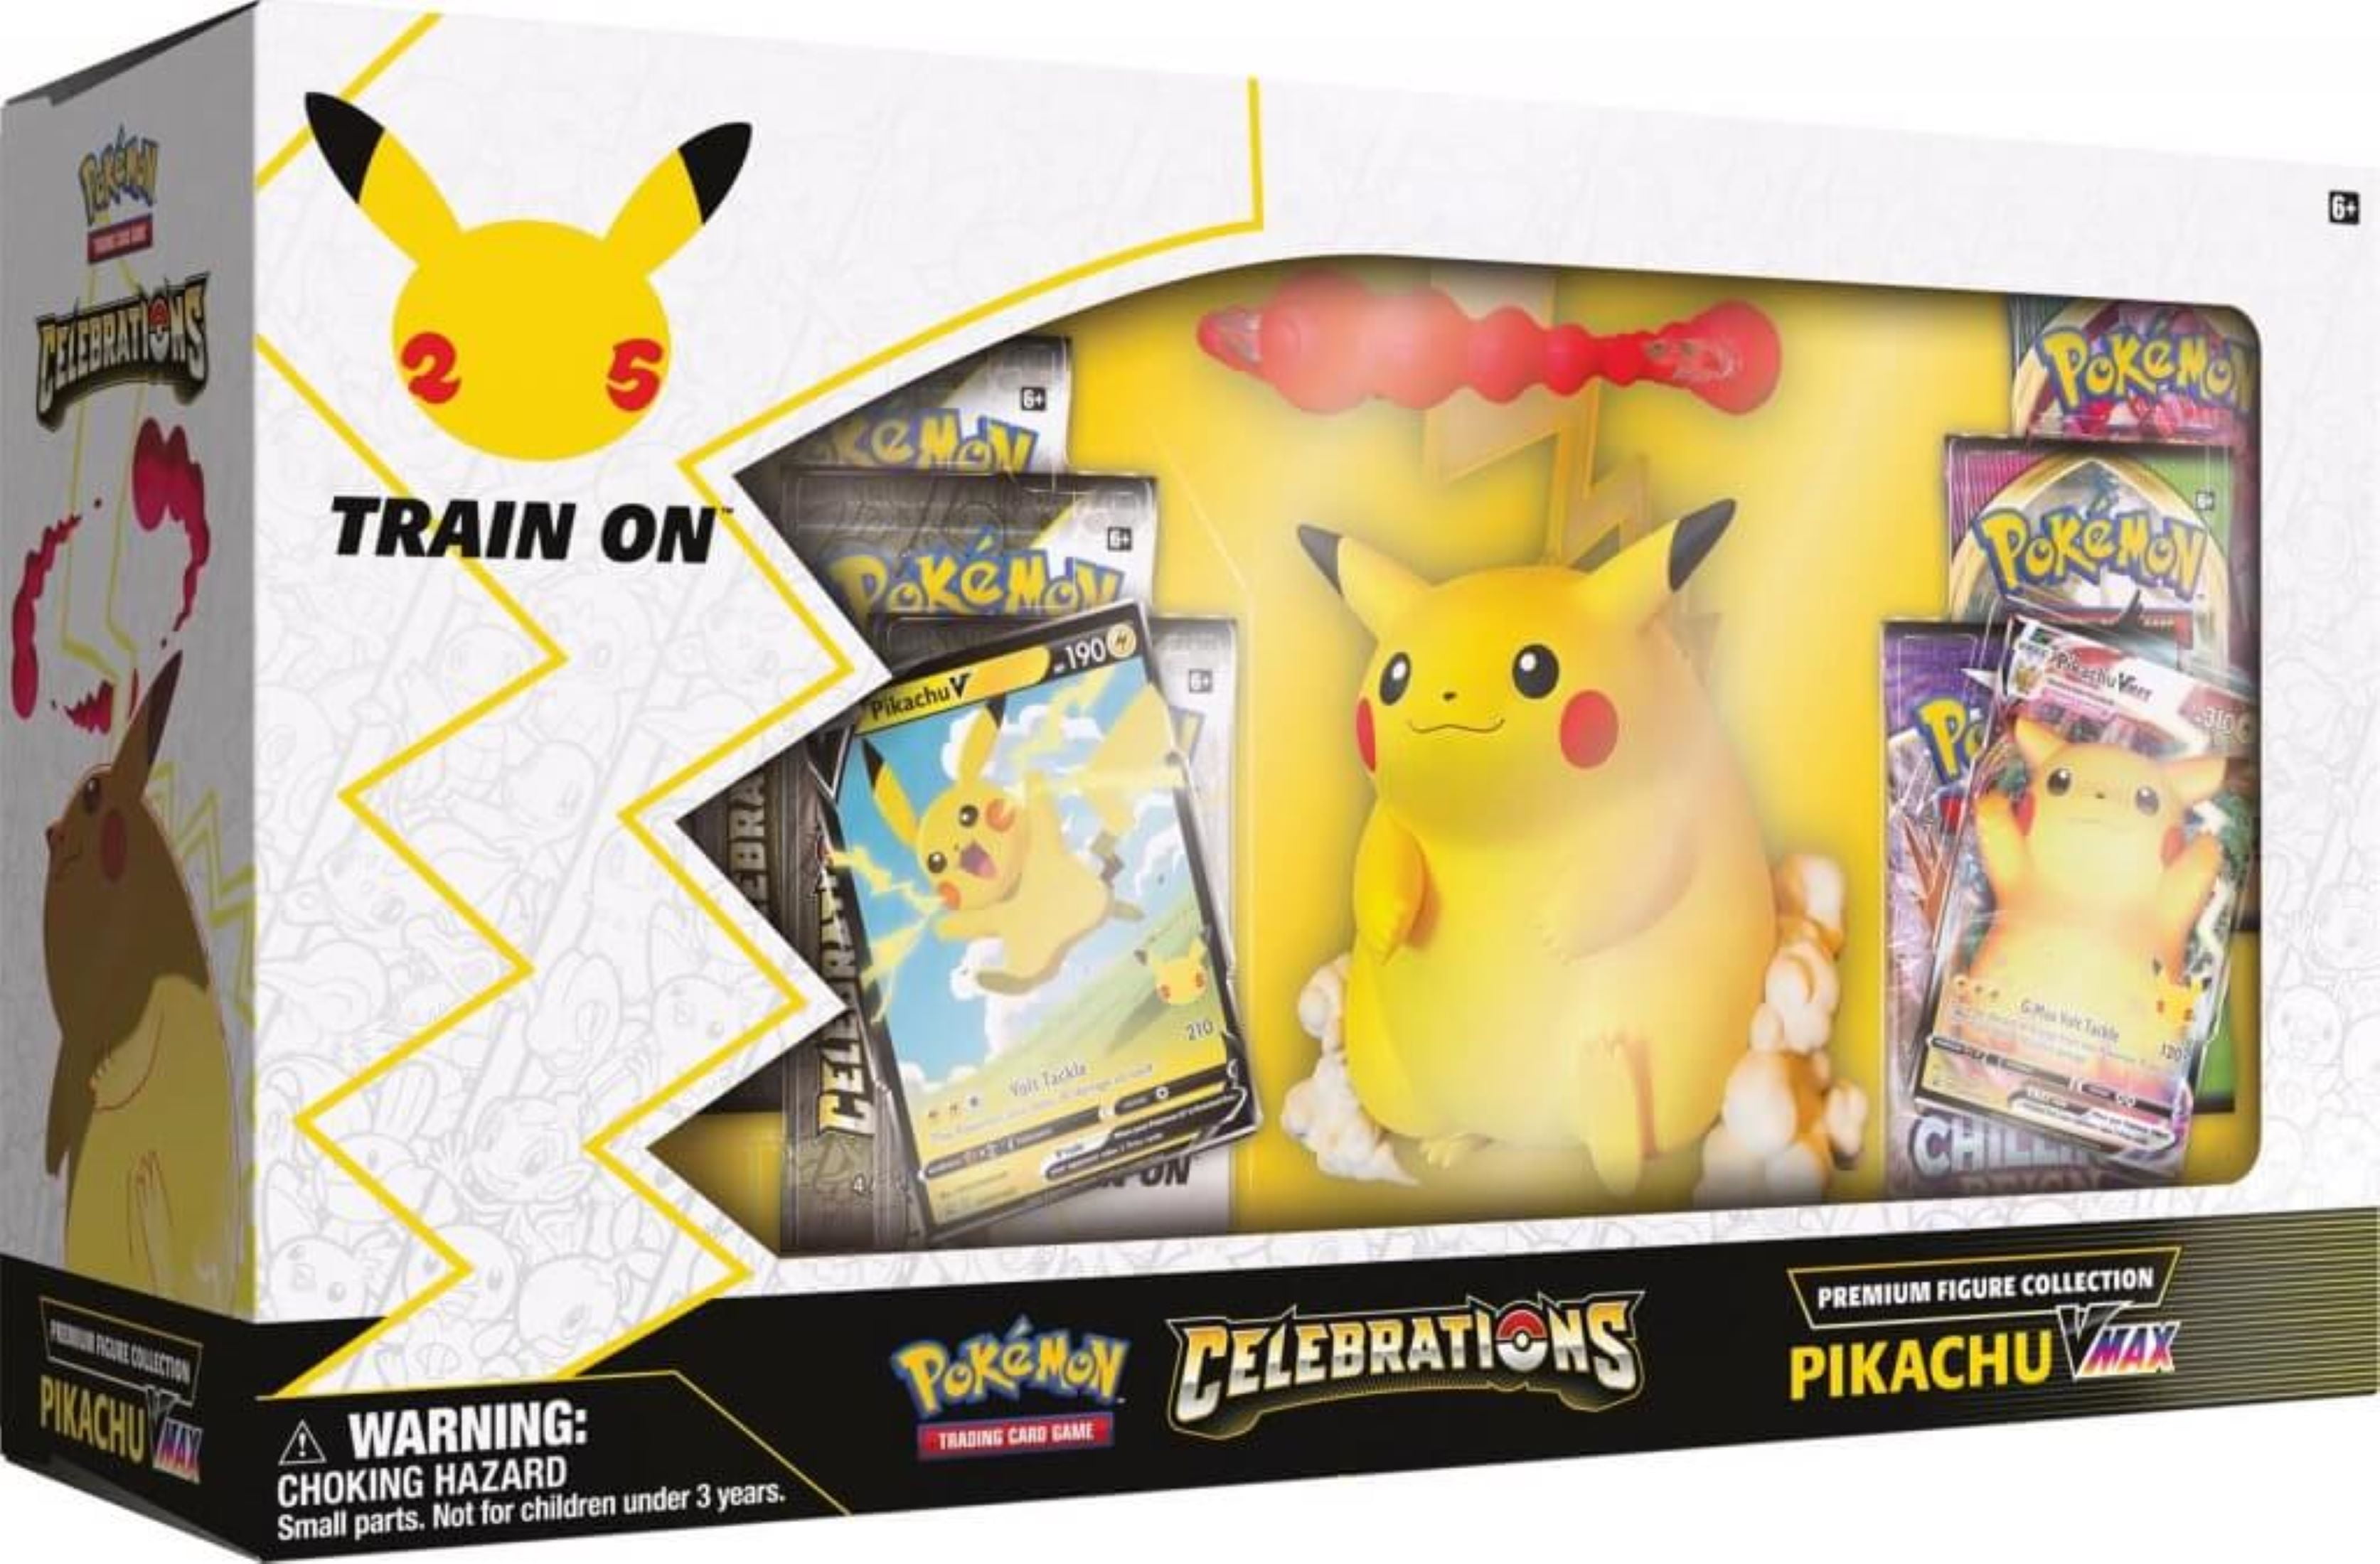 NEW & PACK FRESH complete your set Pokemon Celebrations 25th anniversary